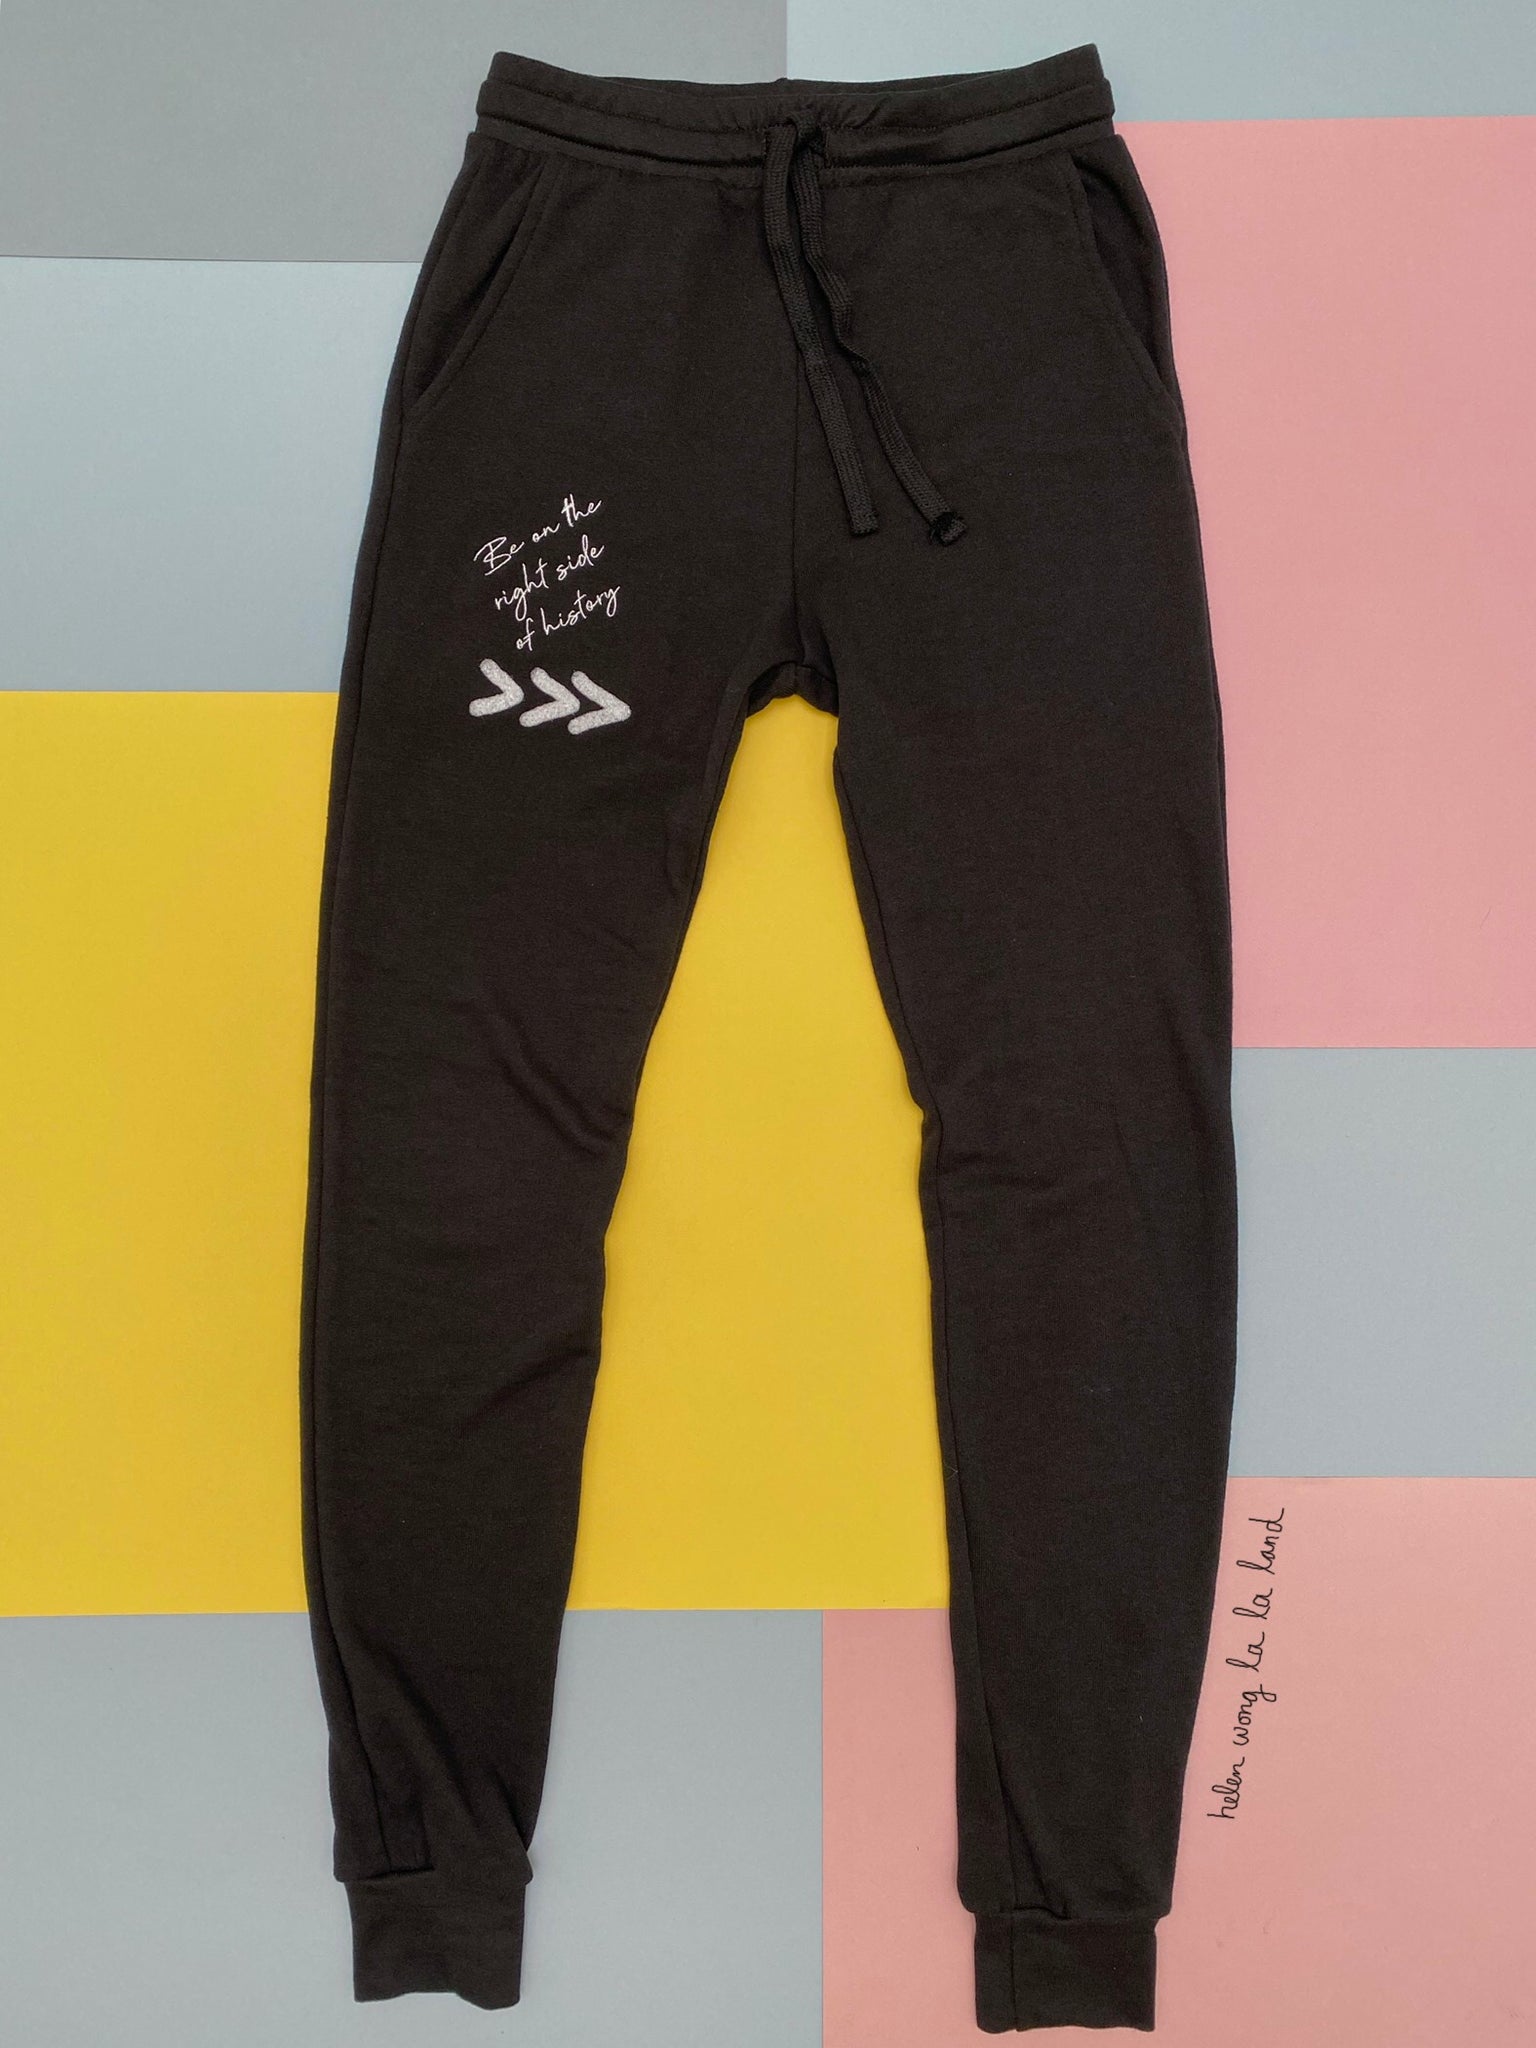 (S/S 2020) French Terry Unisex Joggers in BLACK ORGANIC RPET